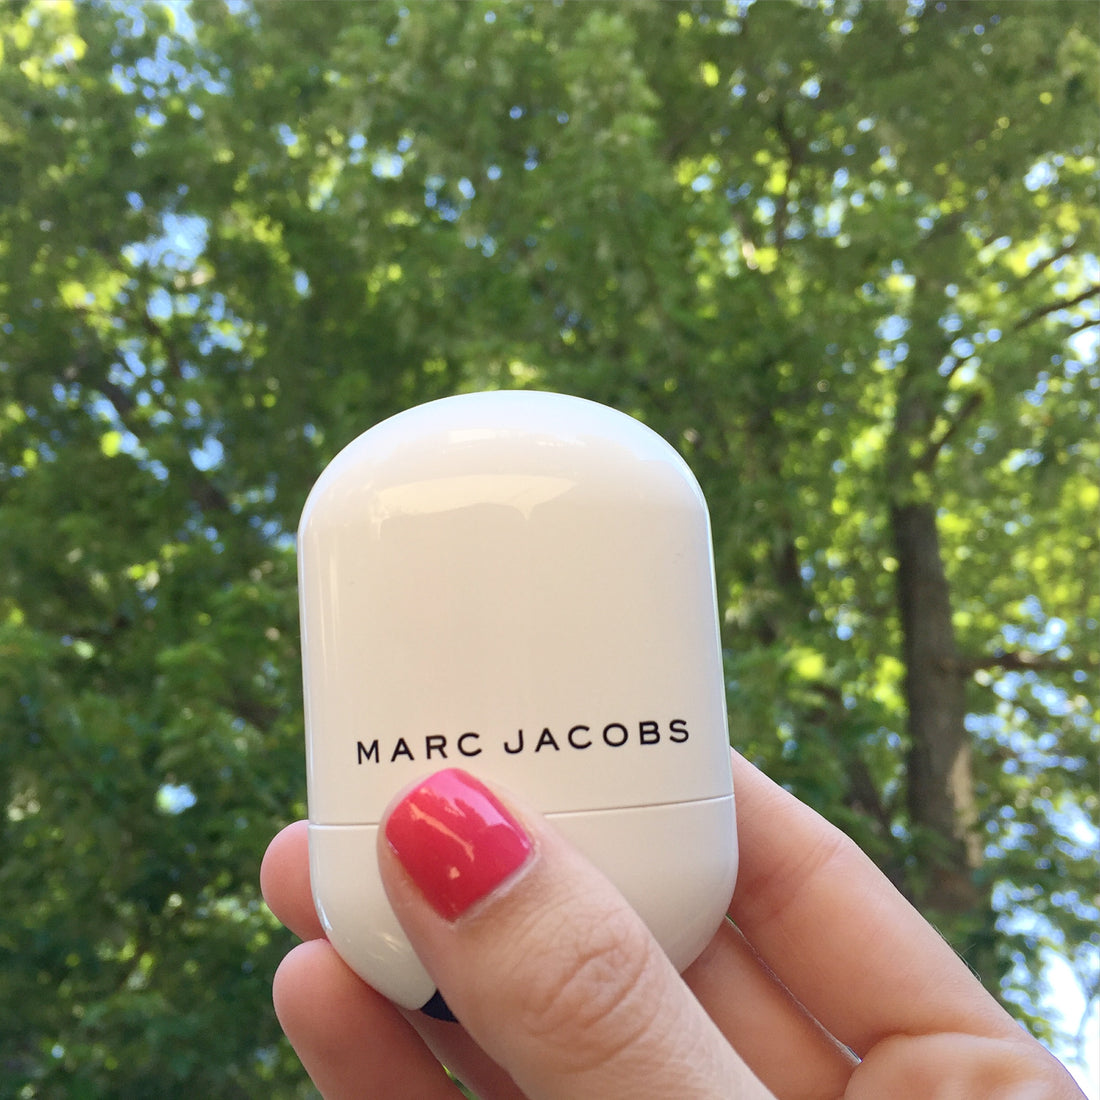 Marc Jacobs Glowstick: Review, Swatch, Demo